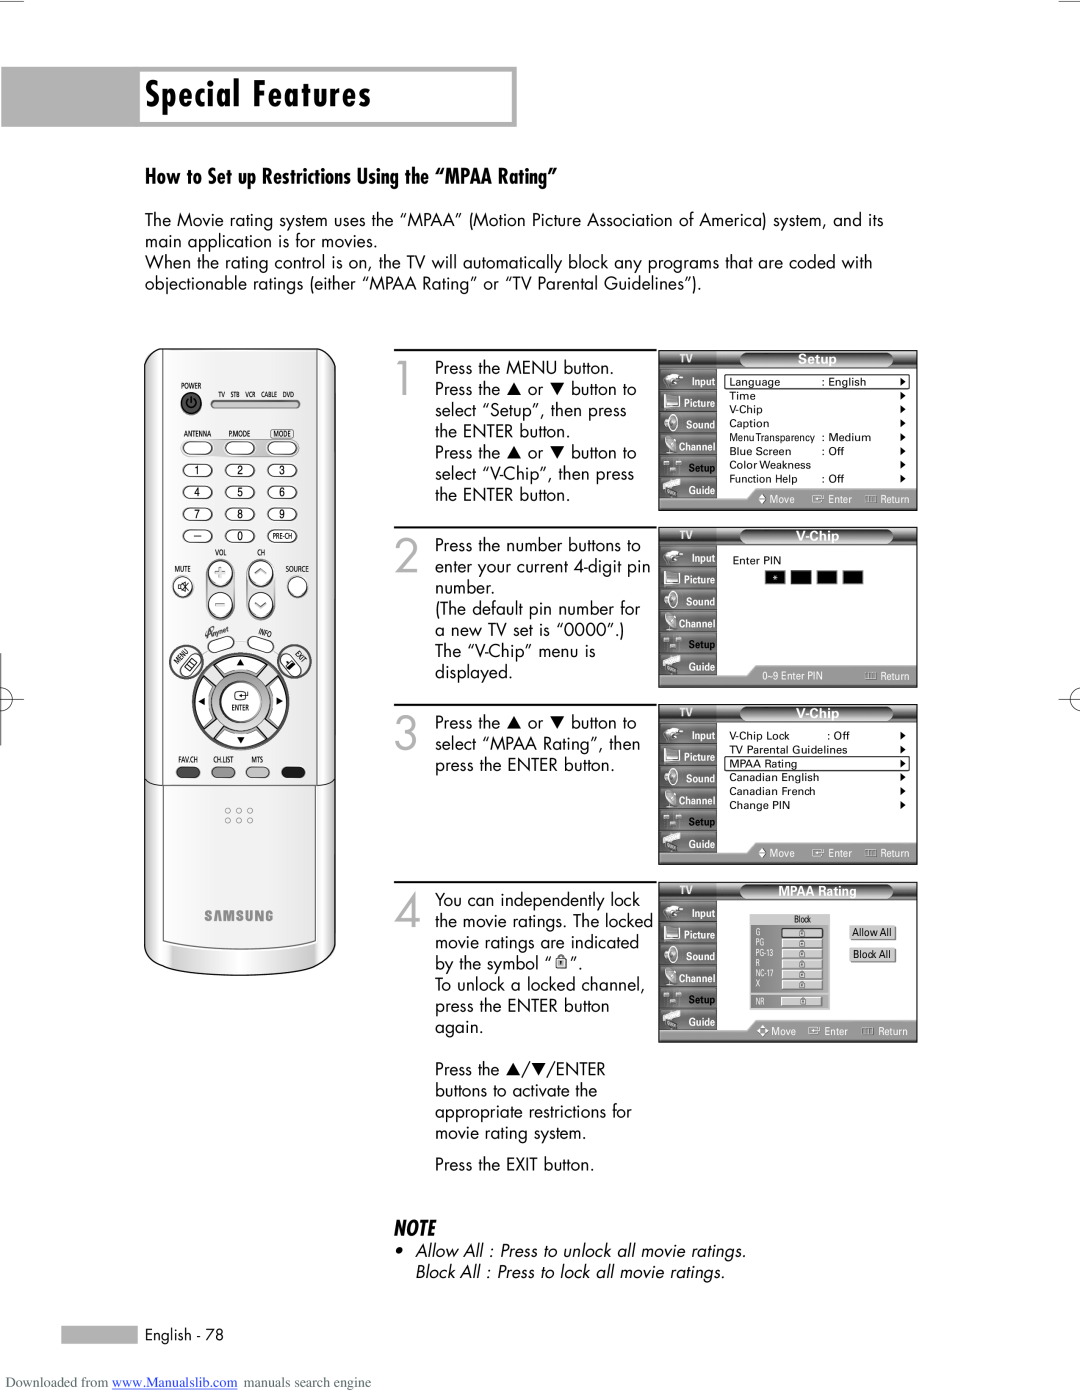 Samsung HL-R6156W manual How to Set up Restrictions Using the “MPAA Rating”, Allow All Press to unlock all movie ratings 